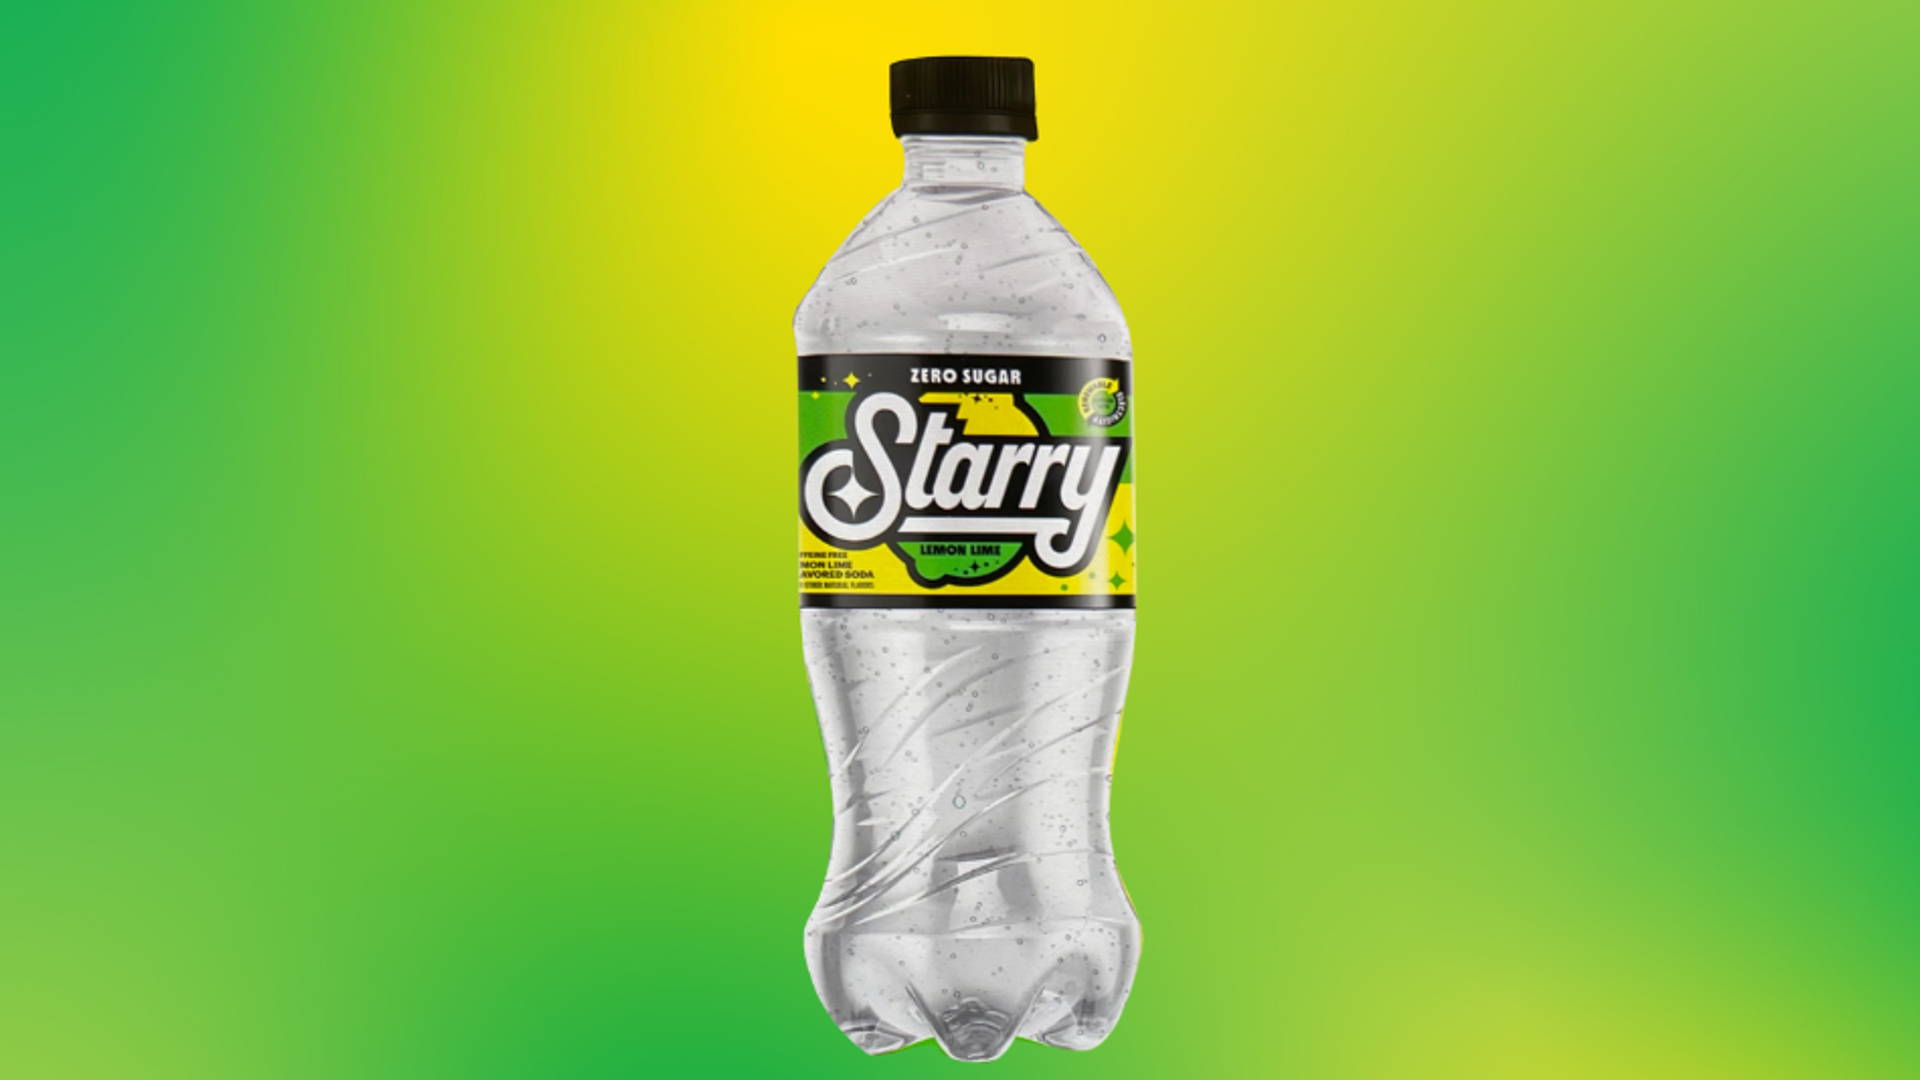 Featured image for PepsiCo Launches Starry, A New Lemon-Lime Soda For the Kids, AKA, Gen Z